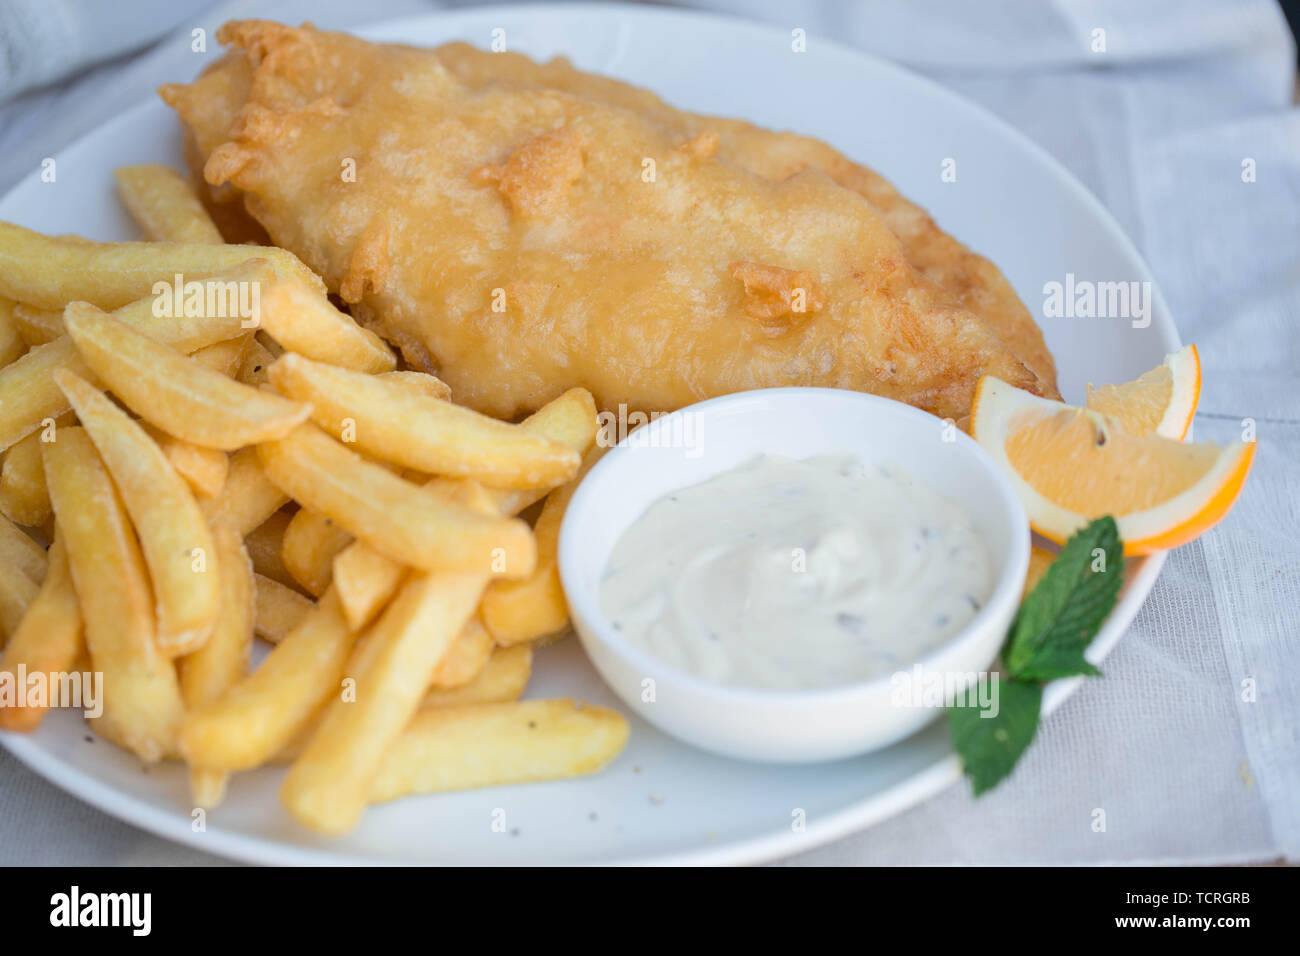 Fish, chips, fish and chips. Stock Photo